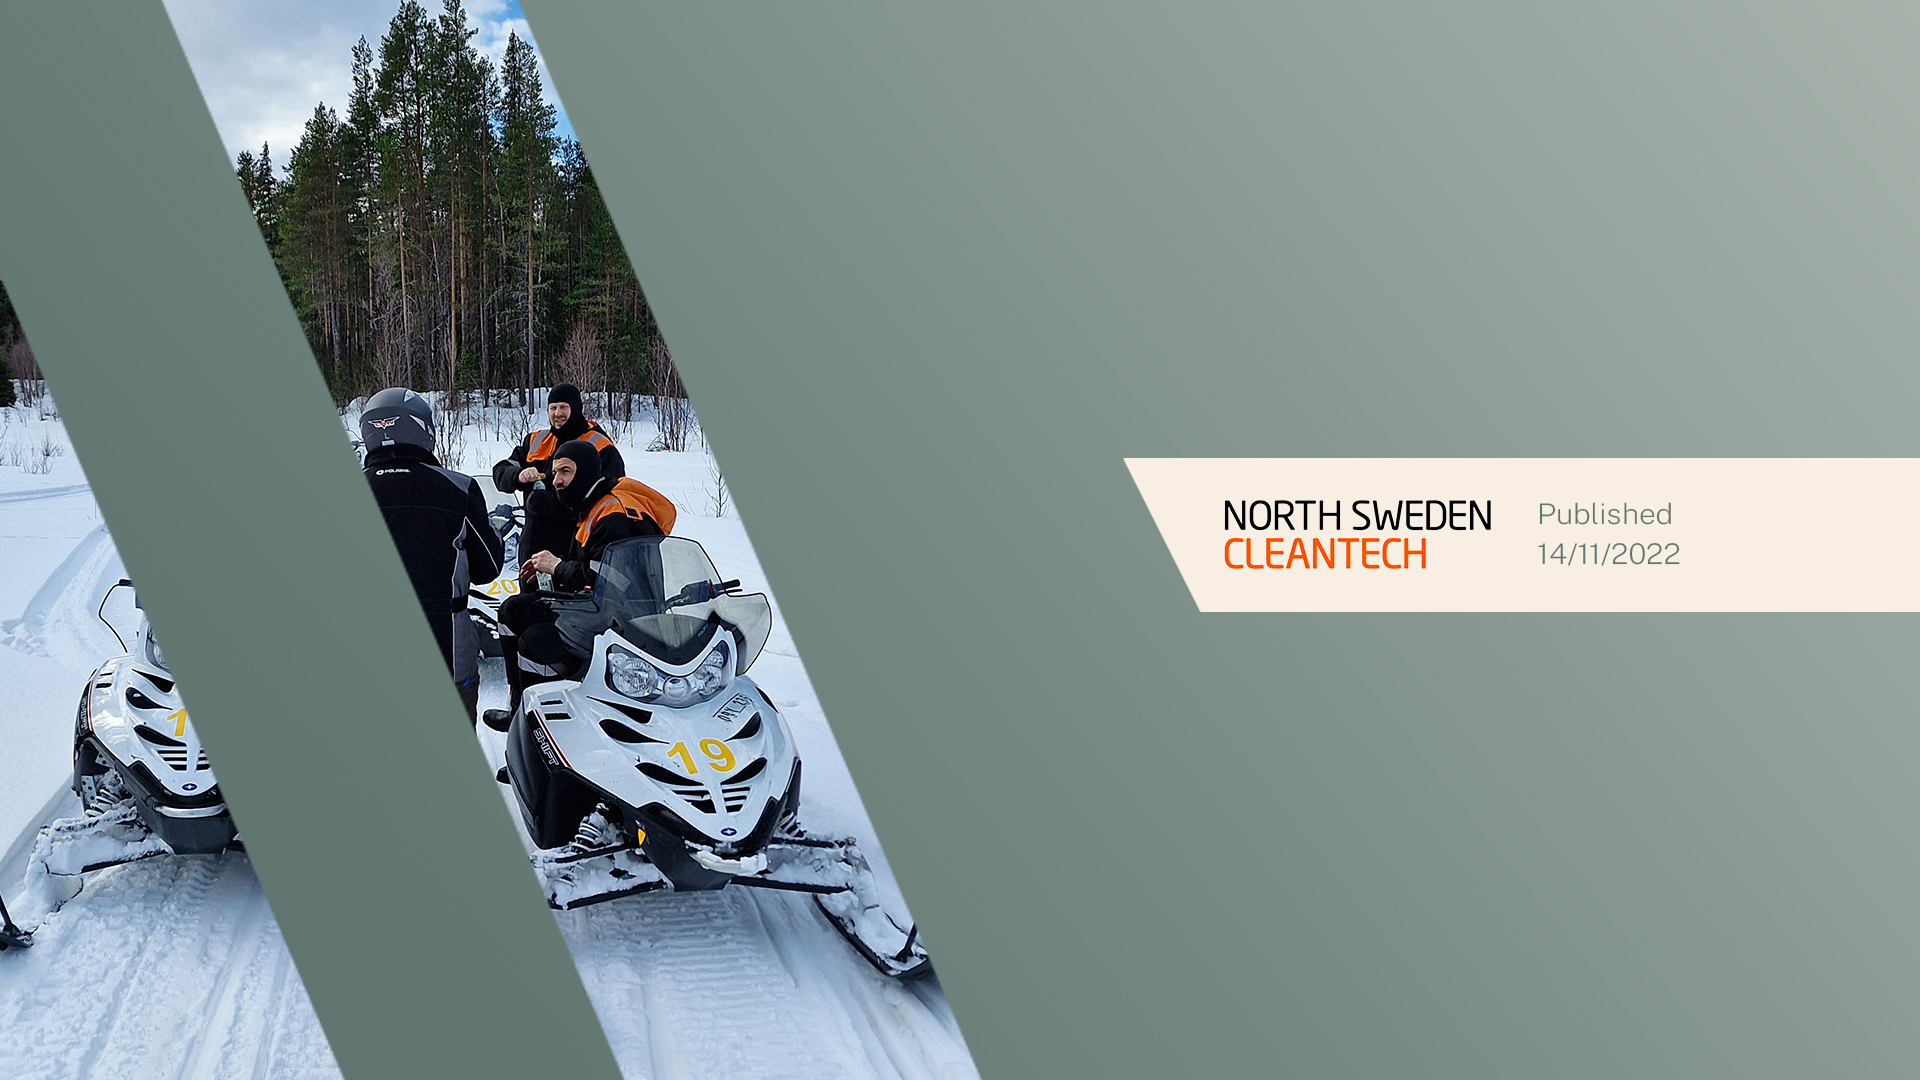 Company of the month North Sweden Cleentech